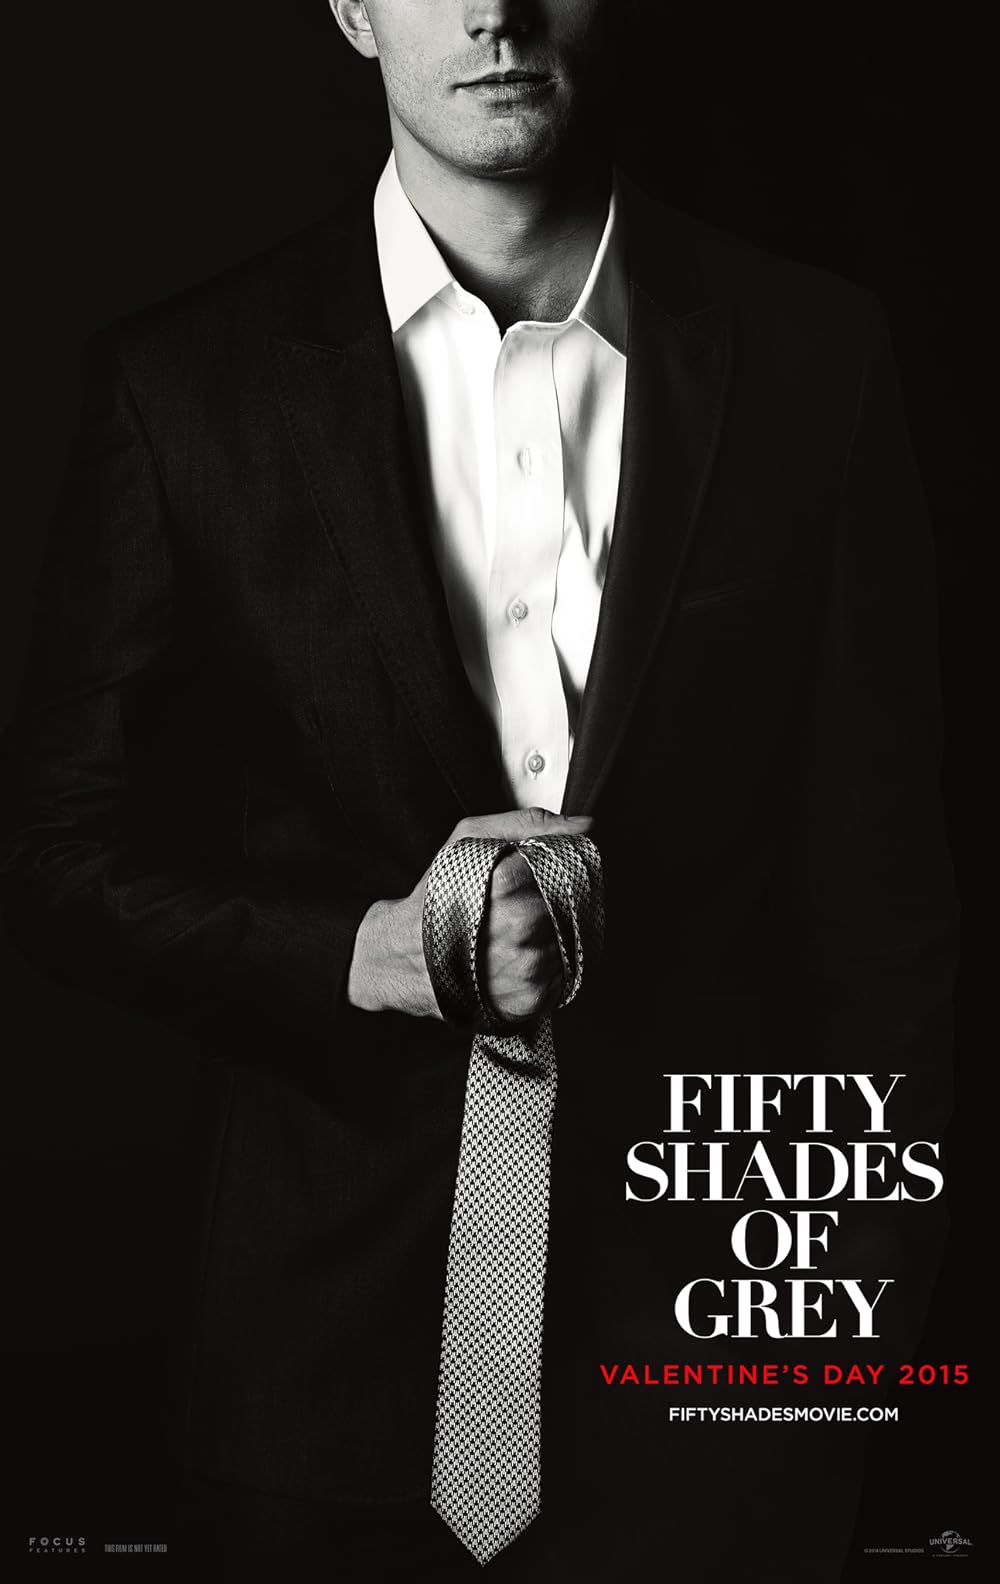 angela fenn recommends fifty shades of gray movie online pic